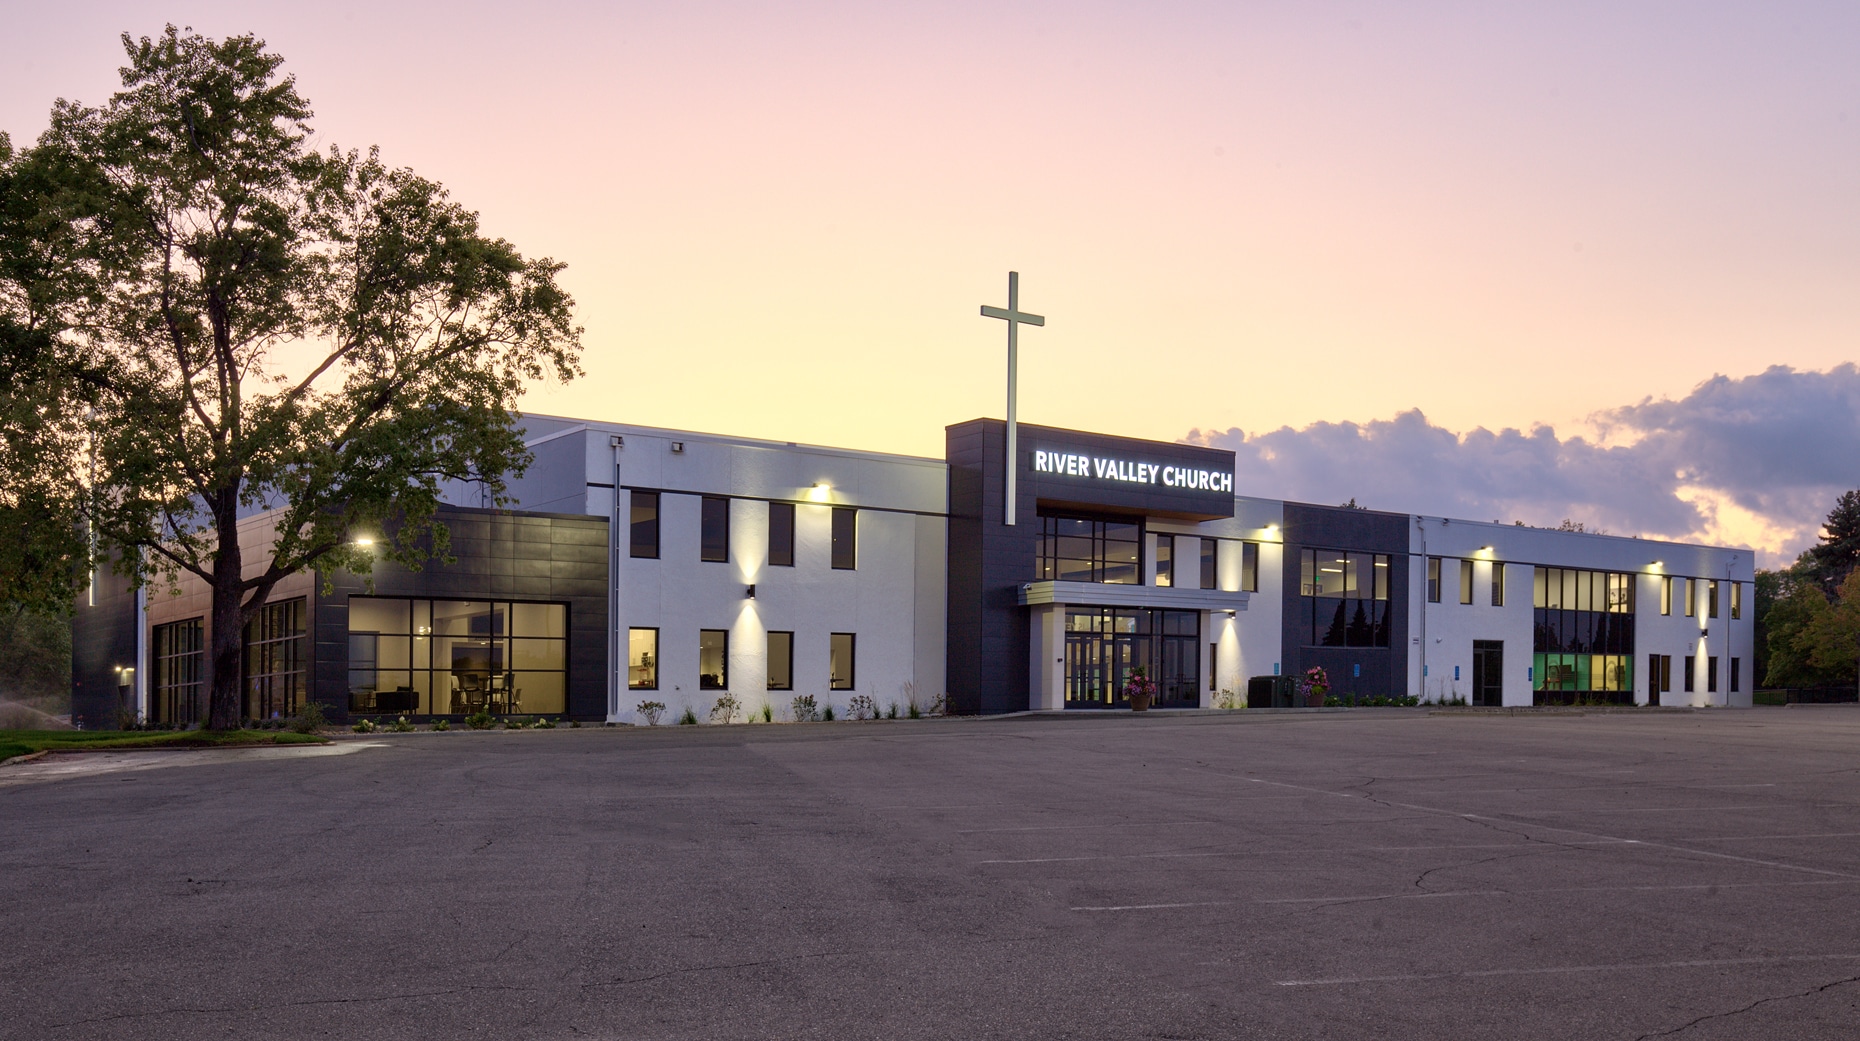 Vanman Architects and Builders | Local church architects and commercial builders in Apple Valley